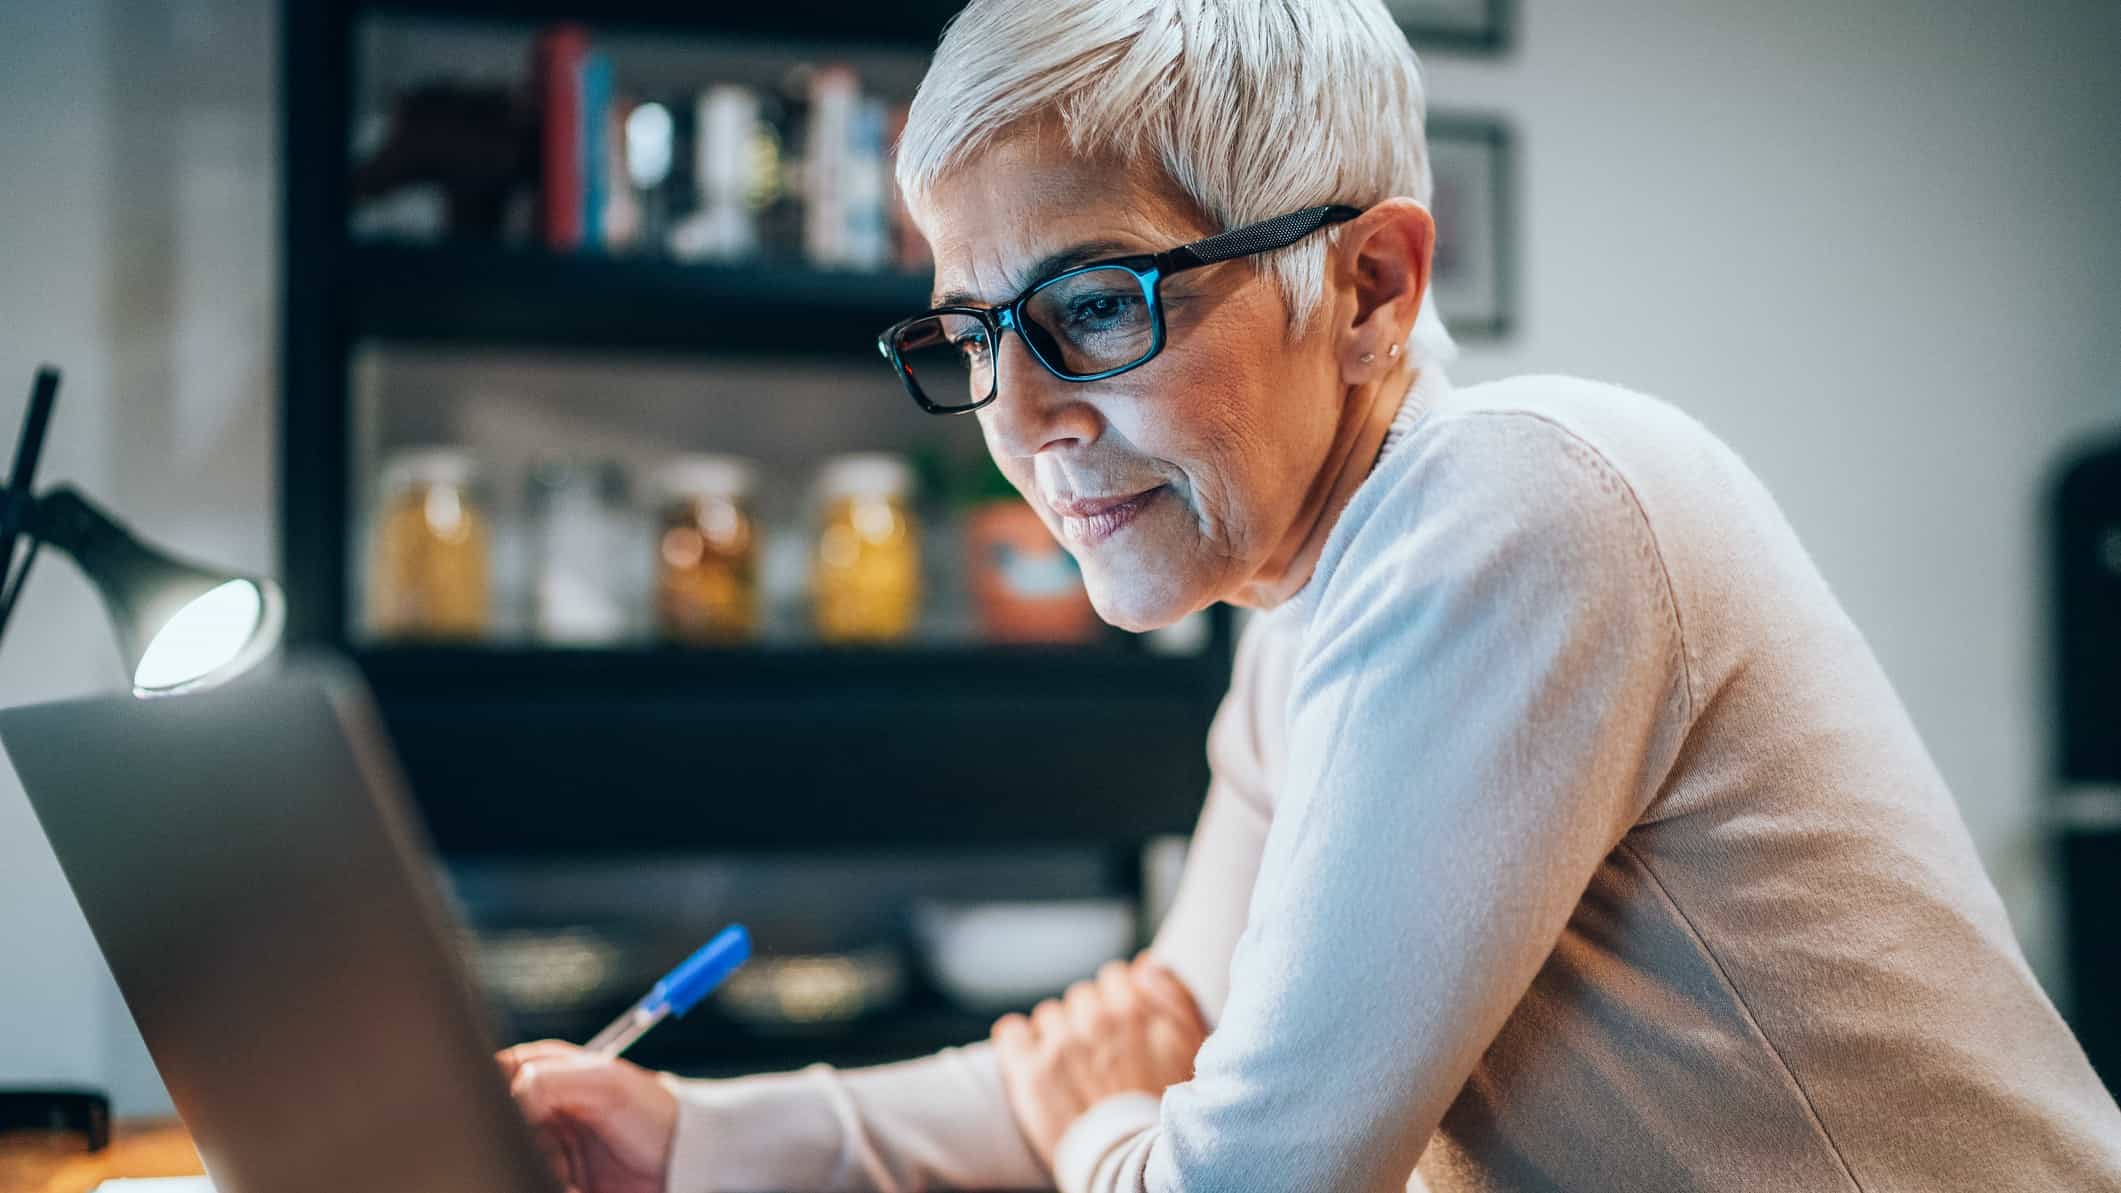 A mature age woman with a groovy short haircut and glasses, sits at her computer, pen in hand thinking about information she is seeing on the screen.